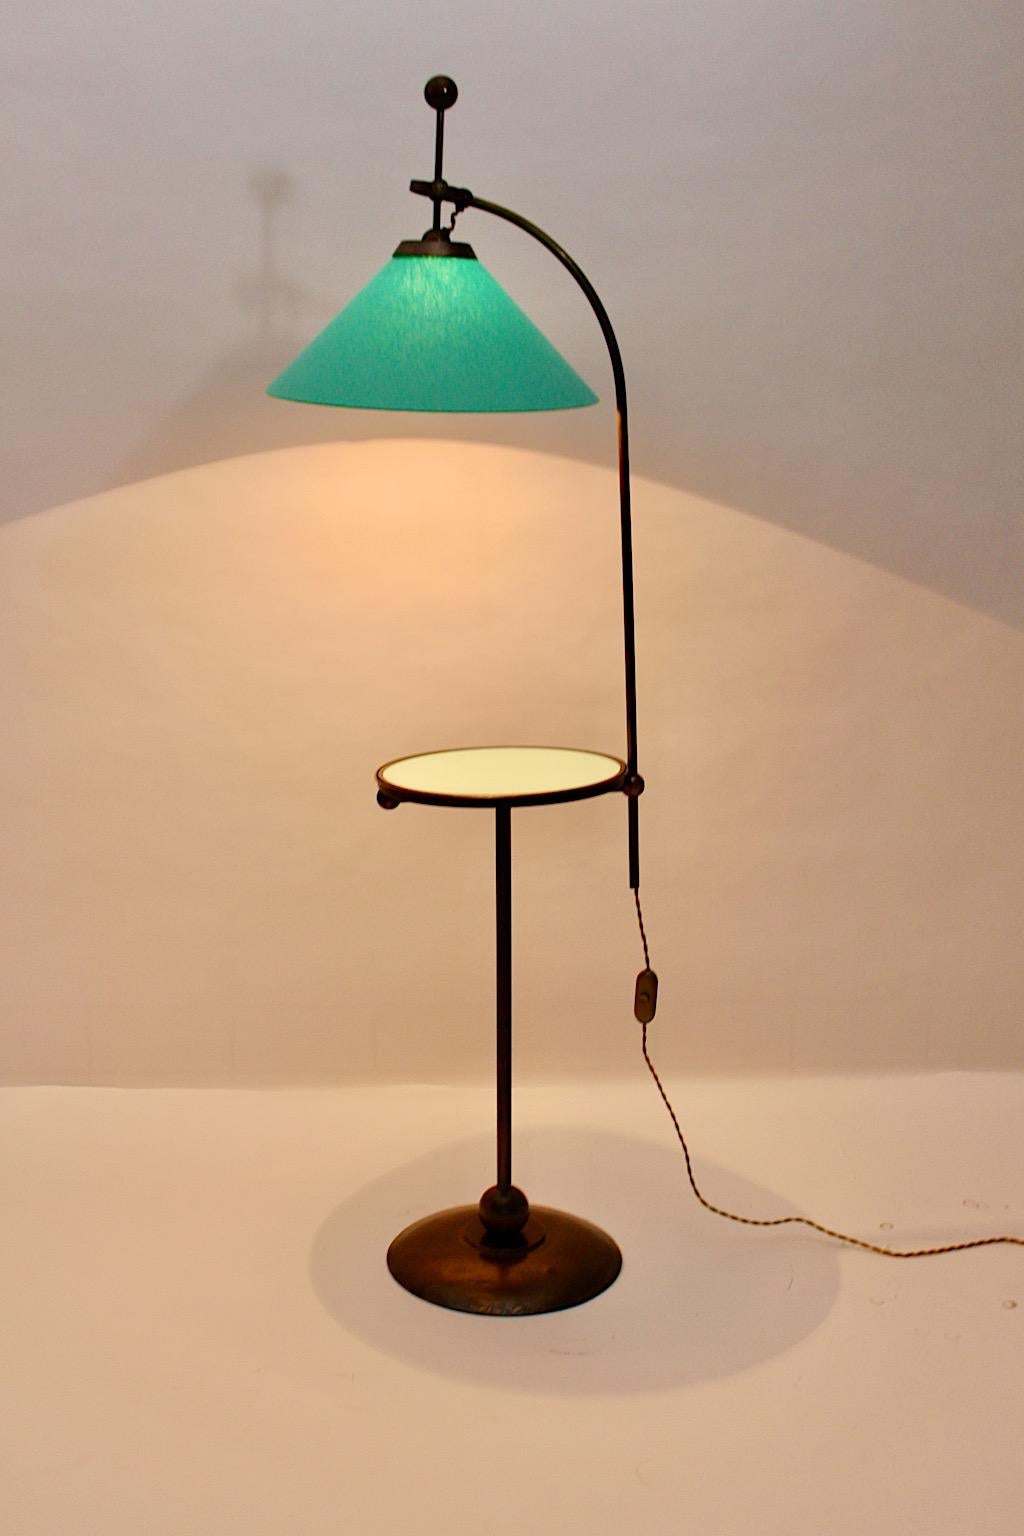 Art Deco vintage floor lamp from brass plated metal with bright sea green or teal or turquoise glass and a new hand made lampshade from textile fabric circa 1925 Austria.
An elegant and sophisticated Art Deco vintage floor lamp with an integrated